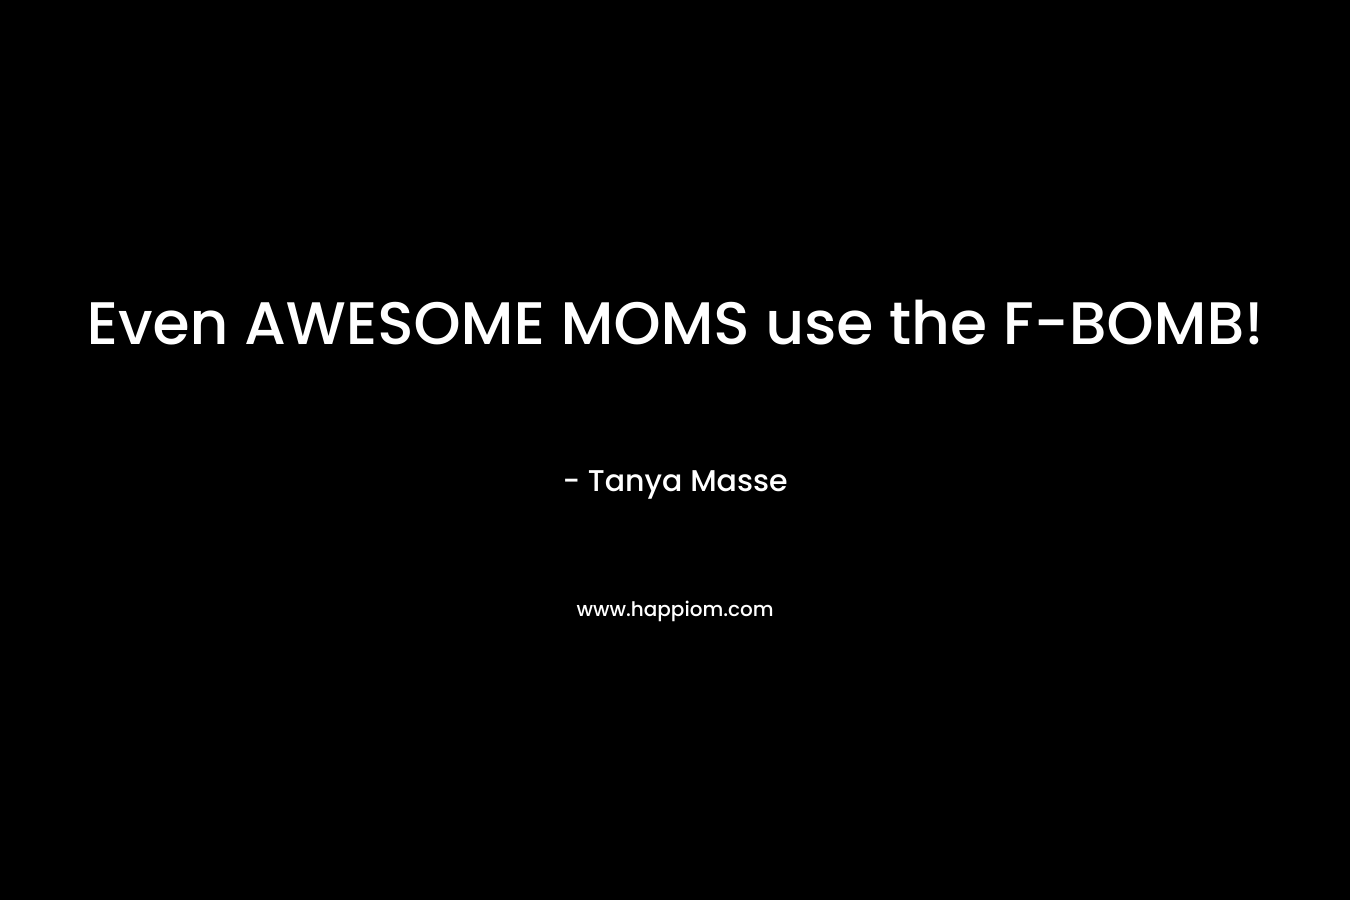 Even AWESOME MOMS use the F-BOMB! – Tanya Masse